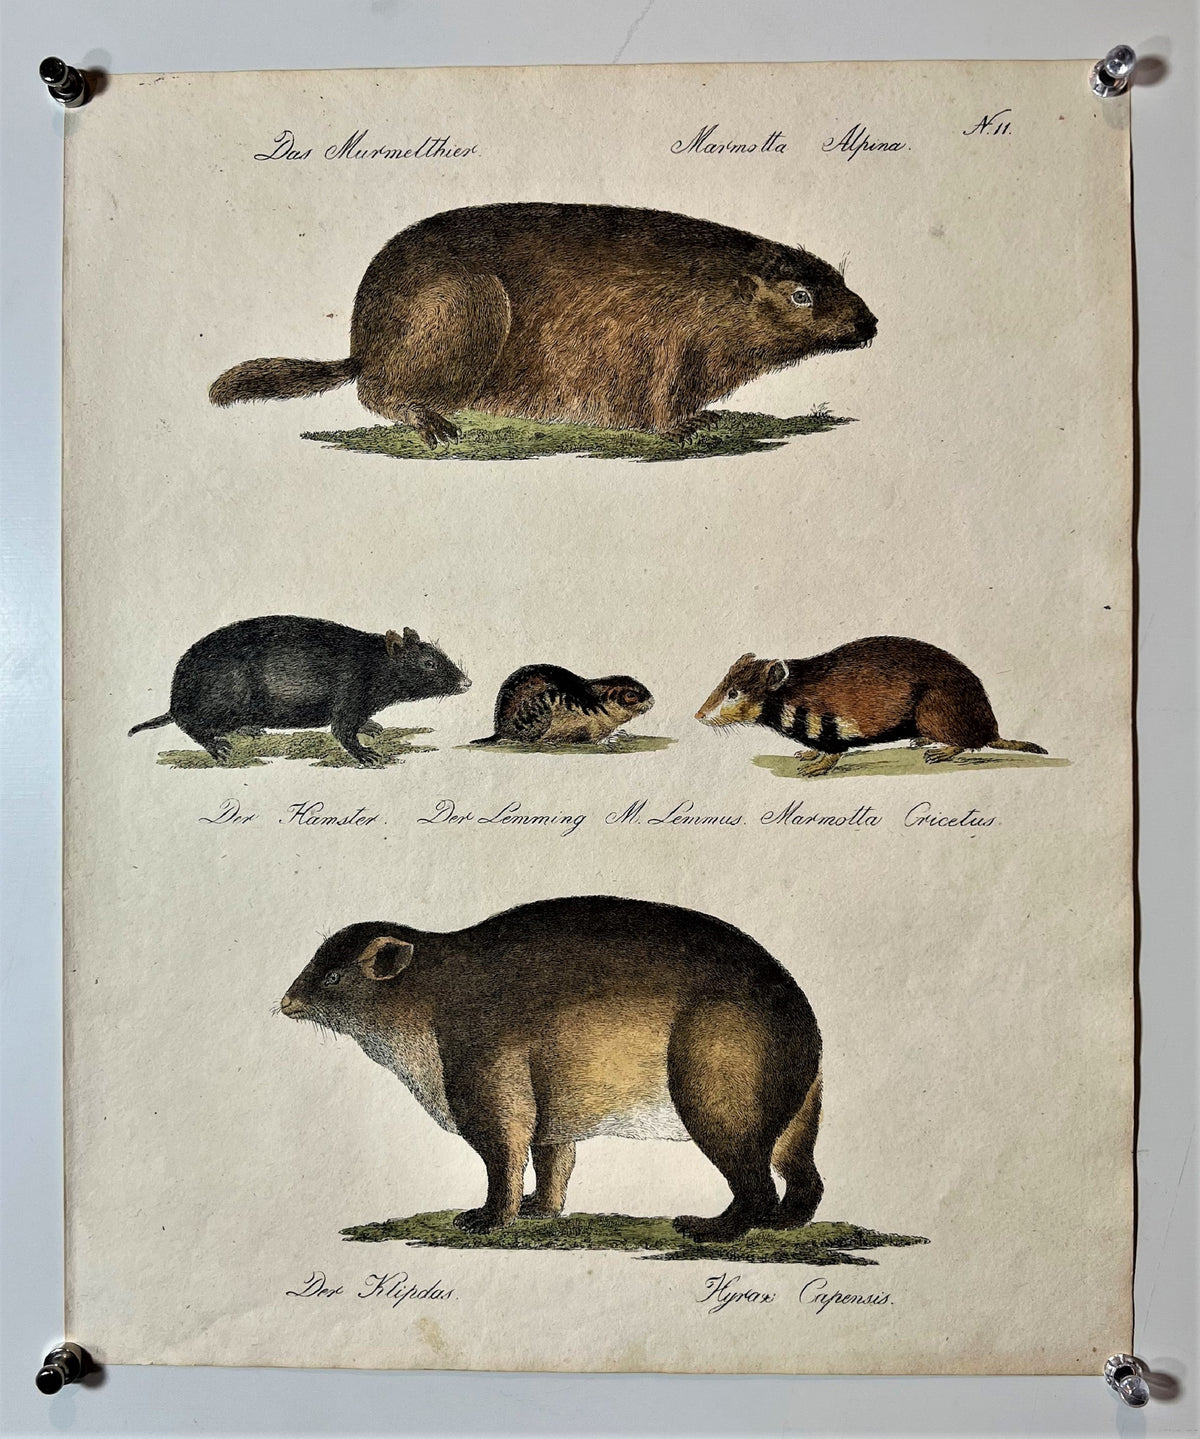 Brodtman Rodents- Hand Colored Engraving - Authentic Vintage Antique Print